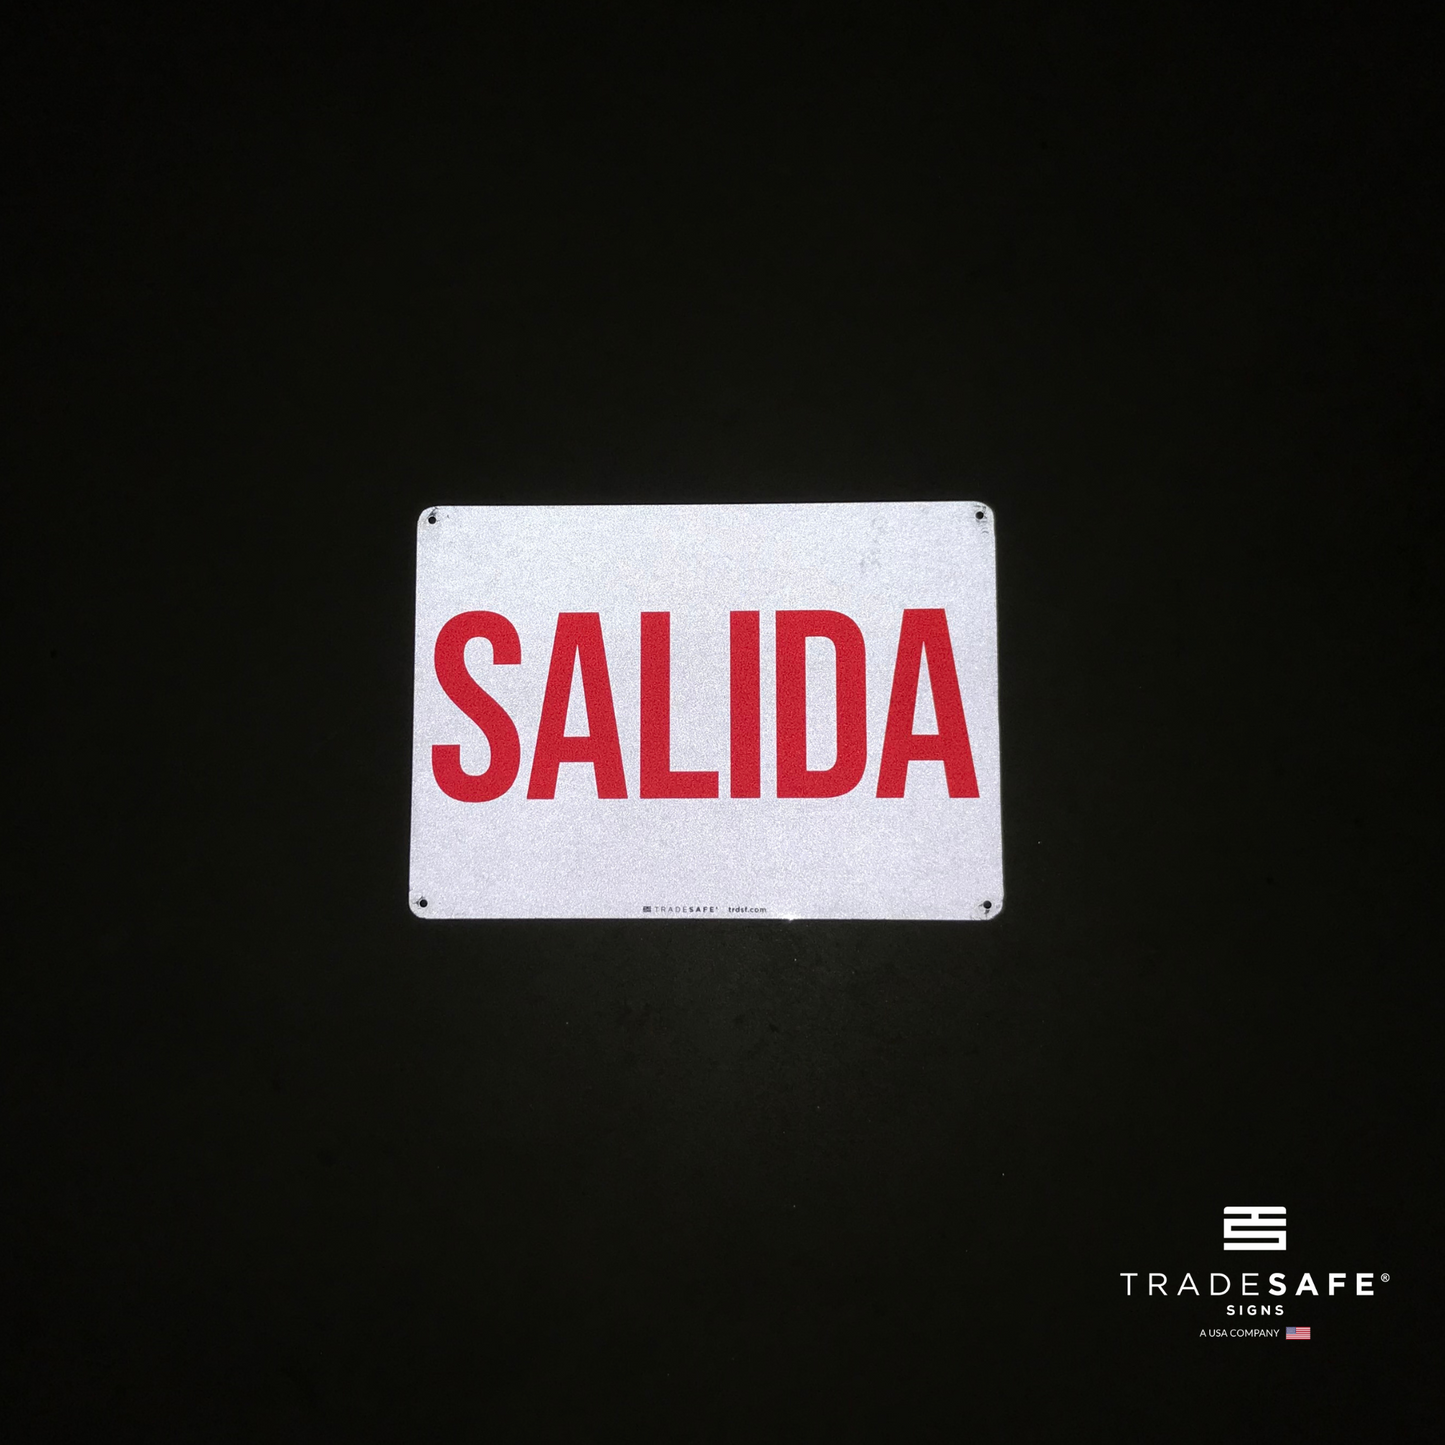 reflective attribute of salida sign on black background